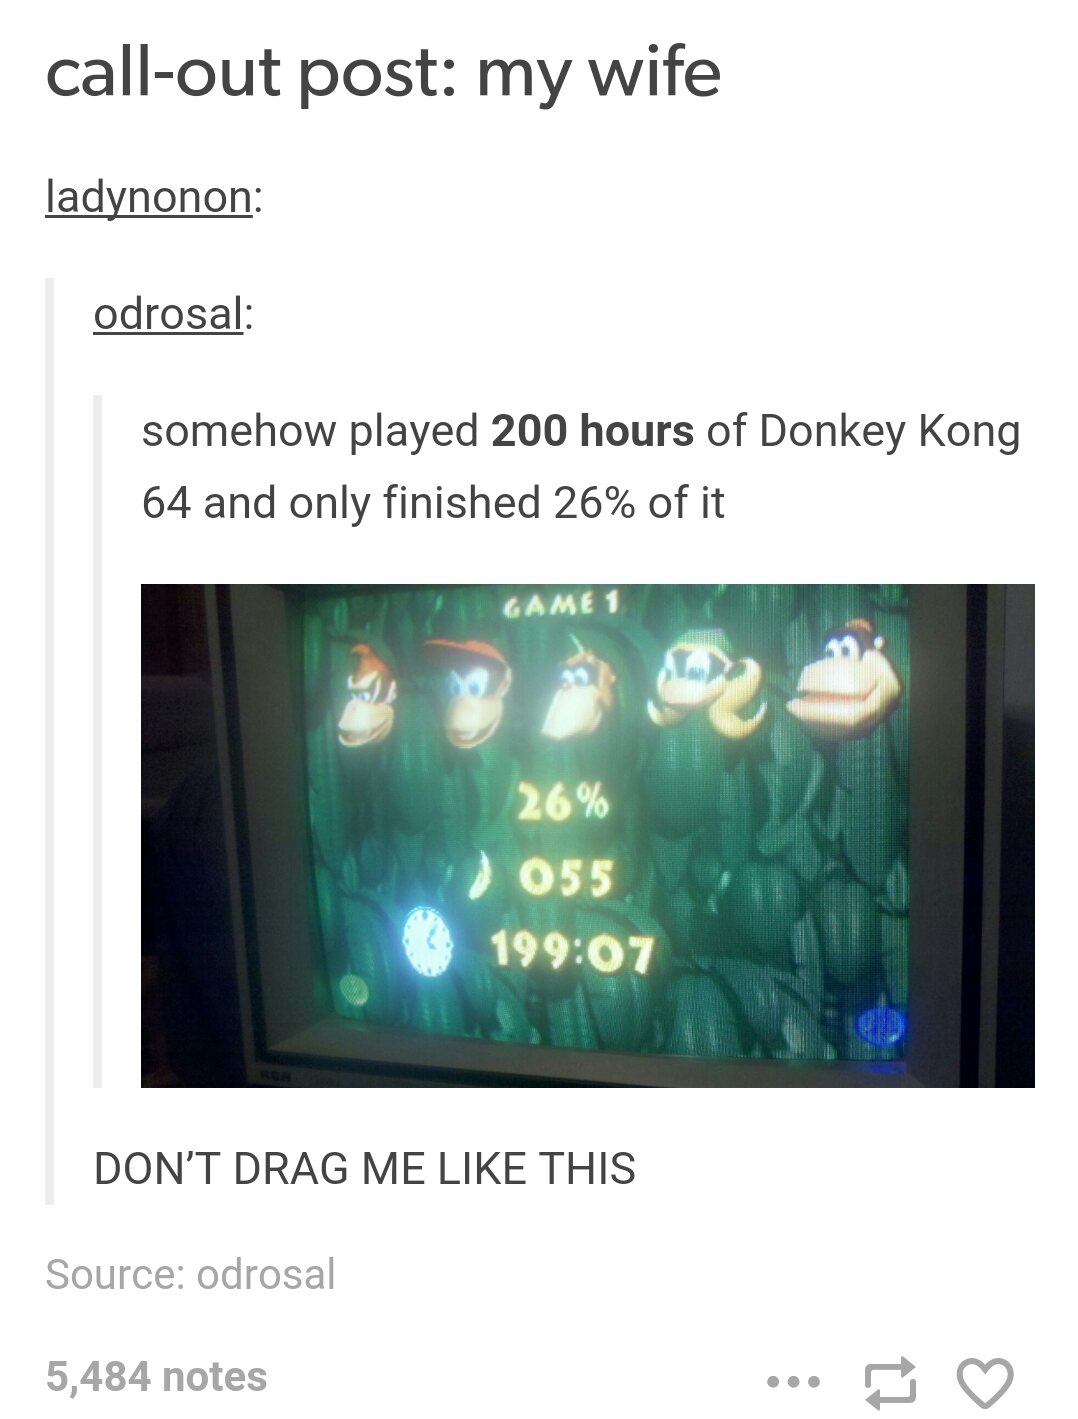 multimedia - callout post my wife ladynonon odrosal somehow played 200 hours of Donkey Kong 64 and only finished 26% of it Game 1 26% 055 Don'T Drag Me This Source odrosal 5,484 notes